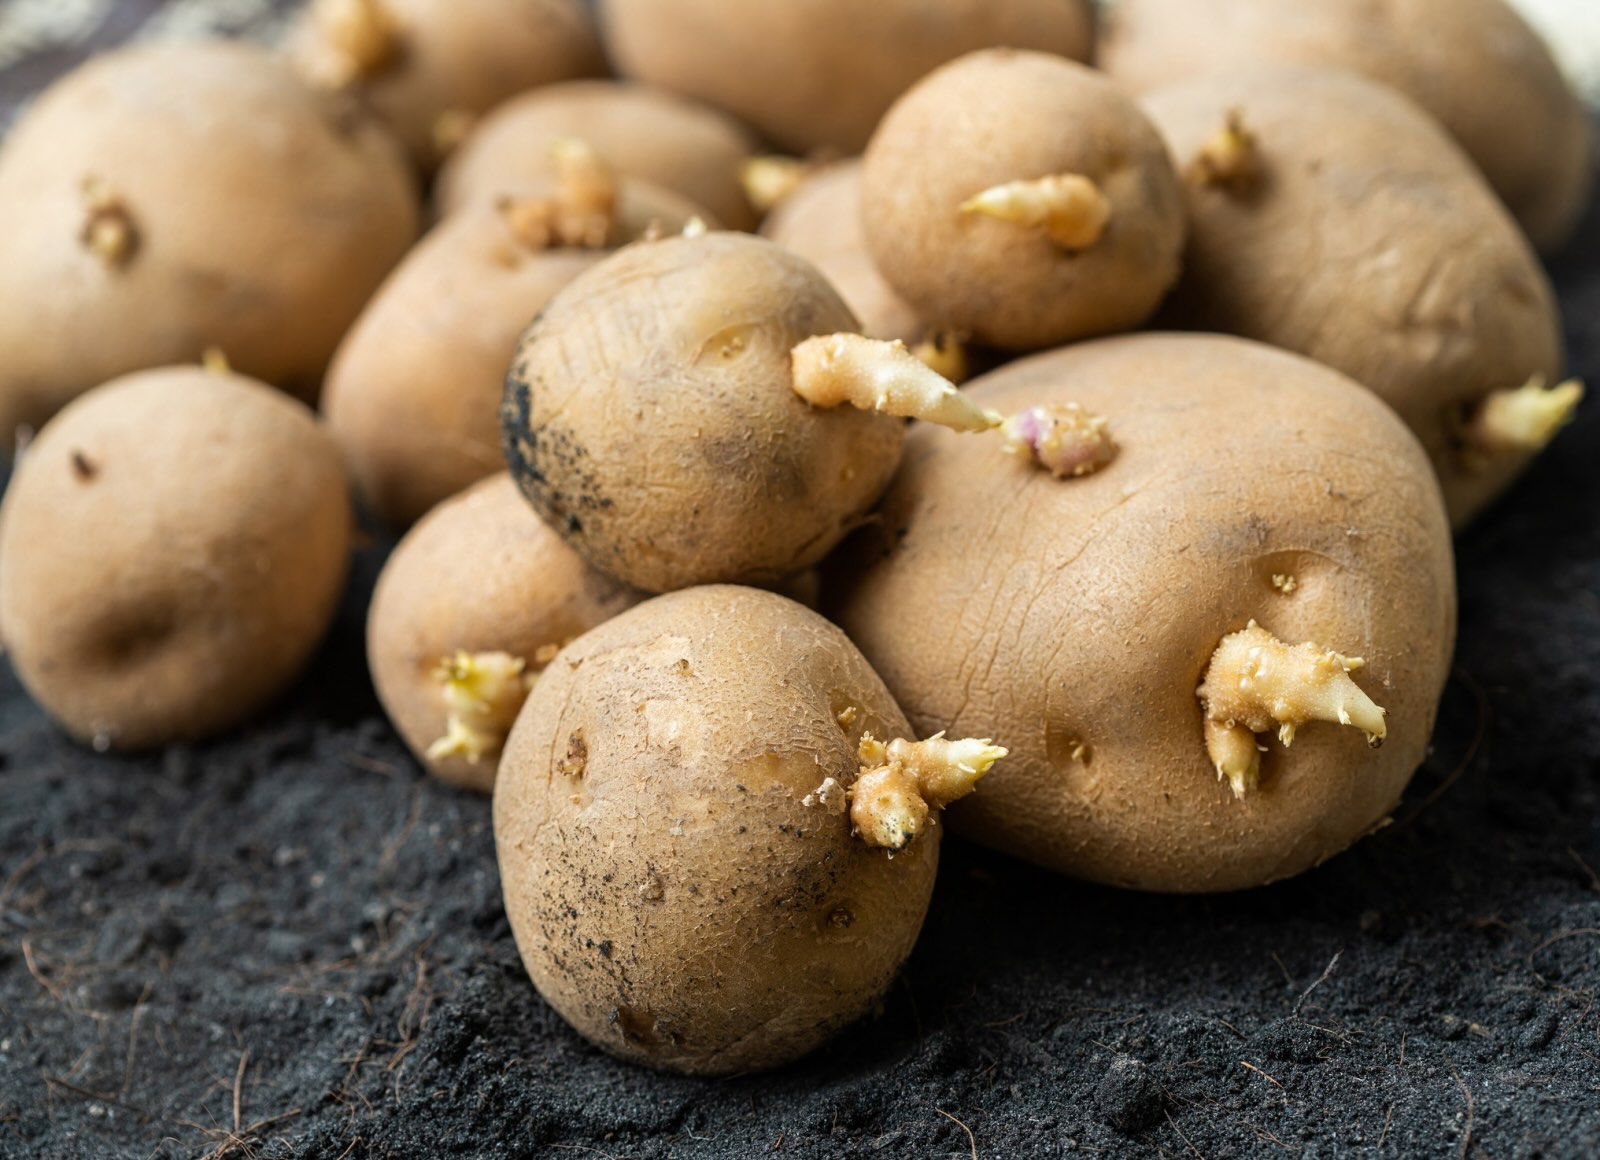 How To Store Potatoes Without Sprouting